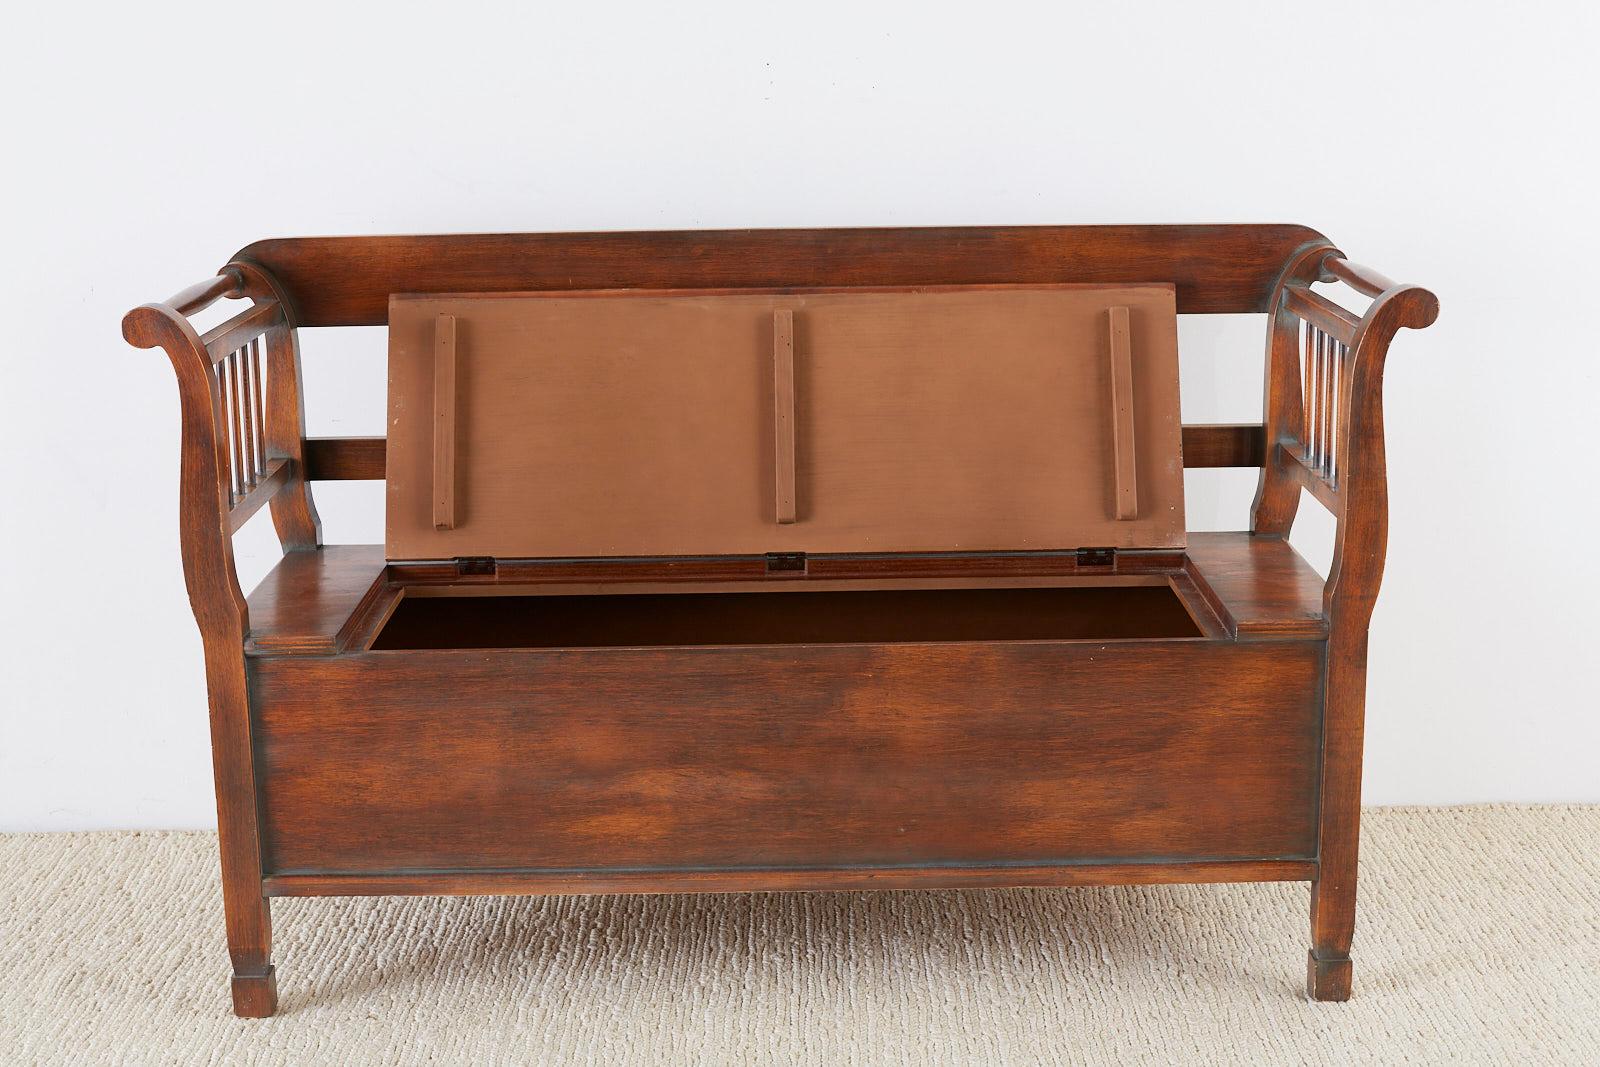 Italian Swedish Style Country Wooden Bench with Storage